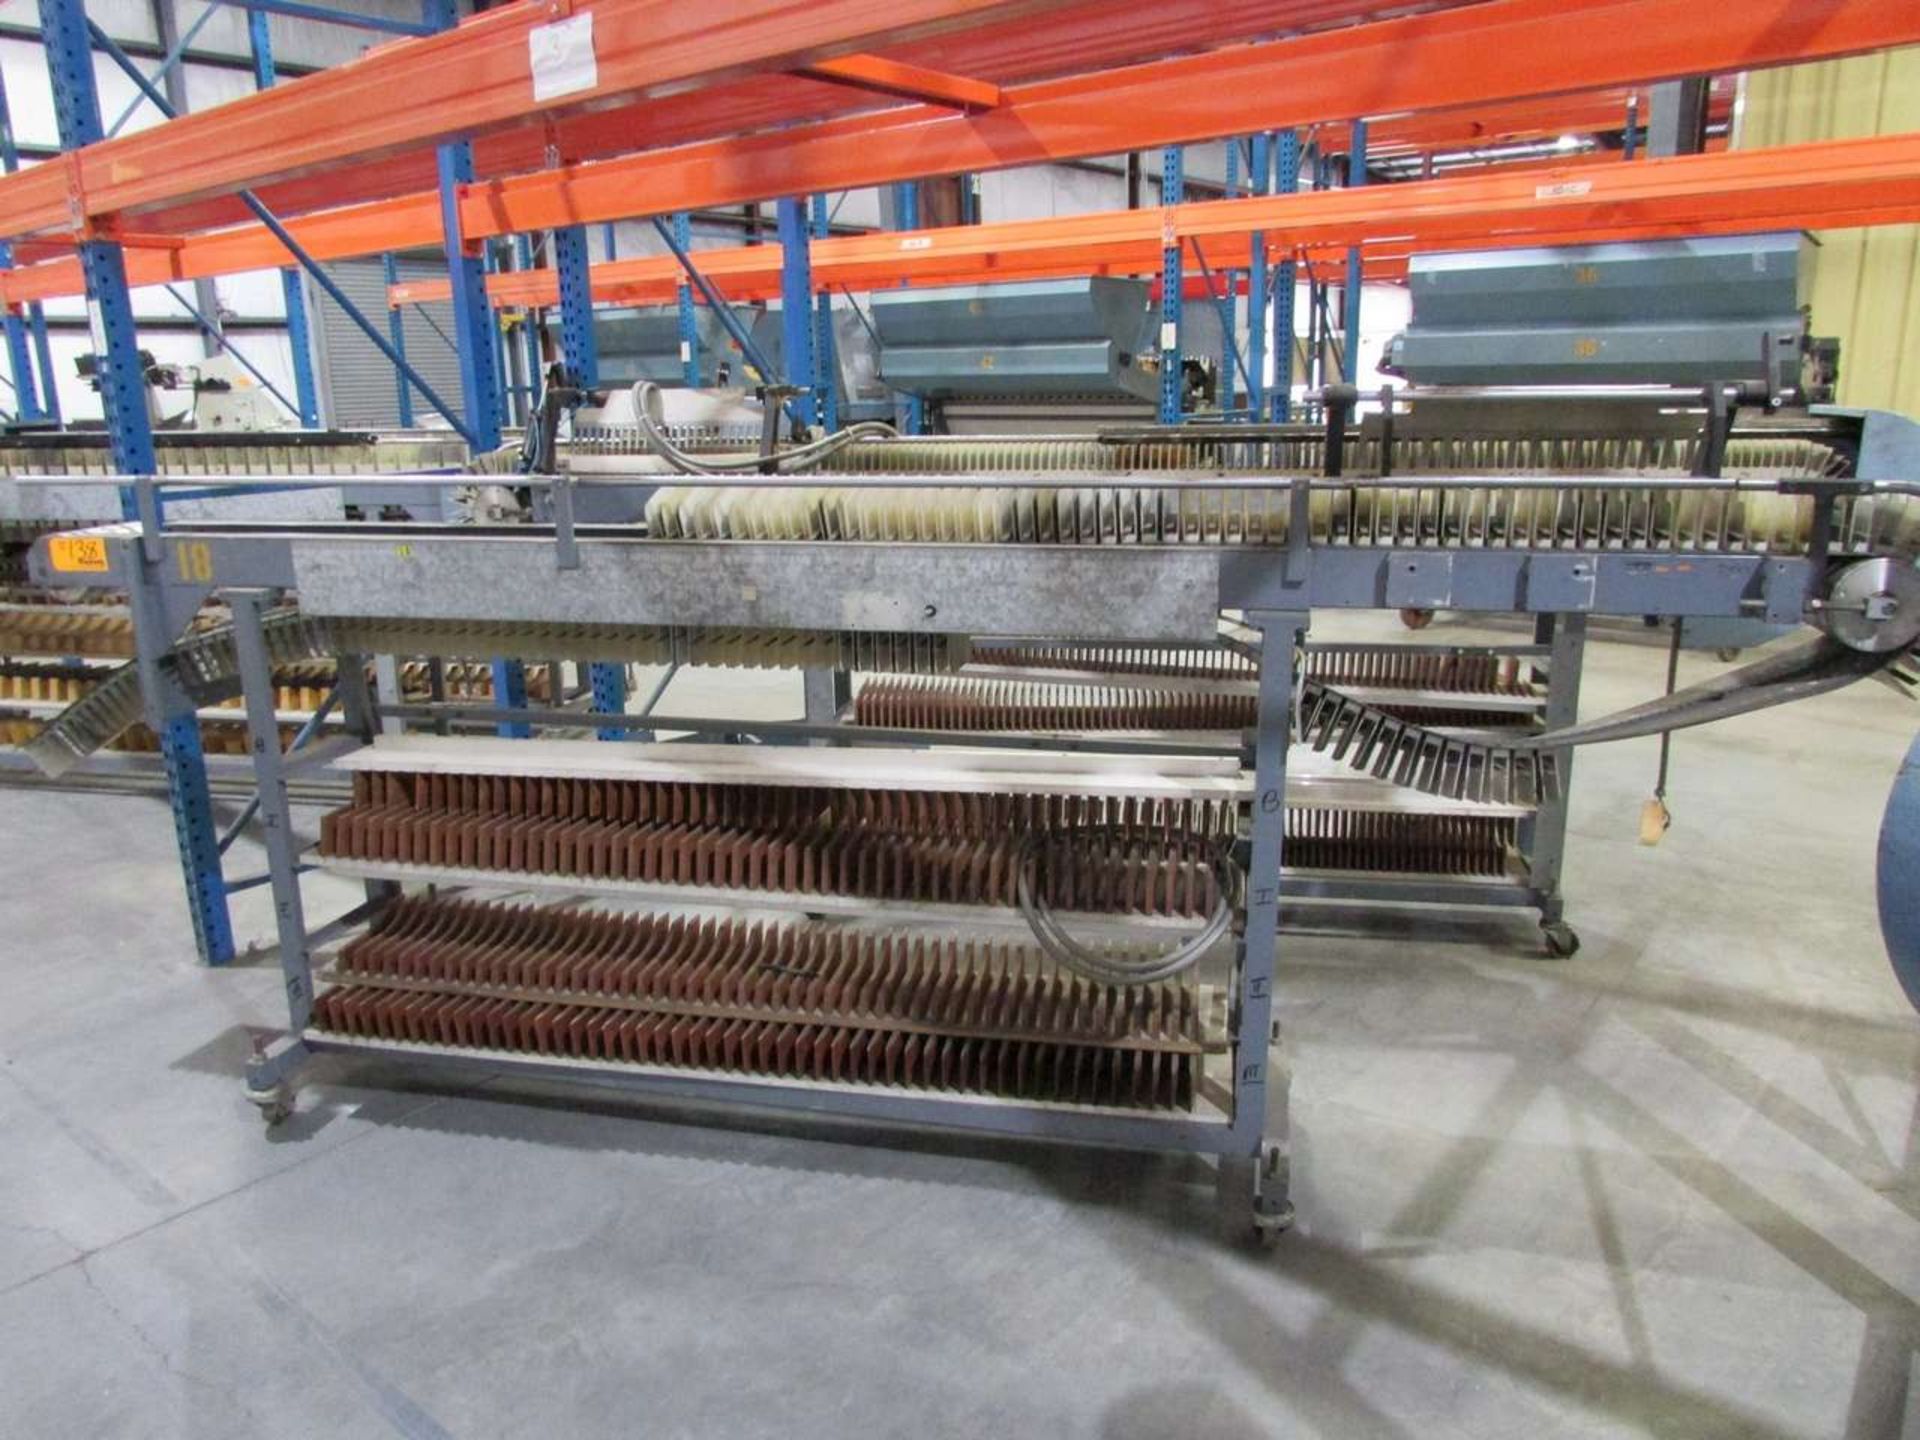 Accordion Style Roll Conveyors - Image 4 of 4